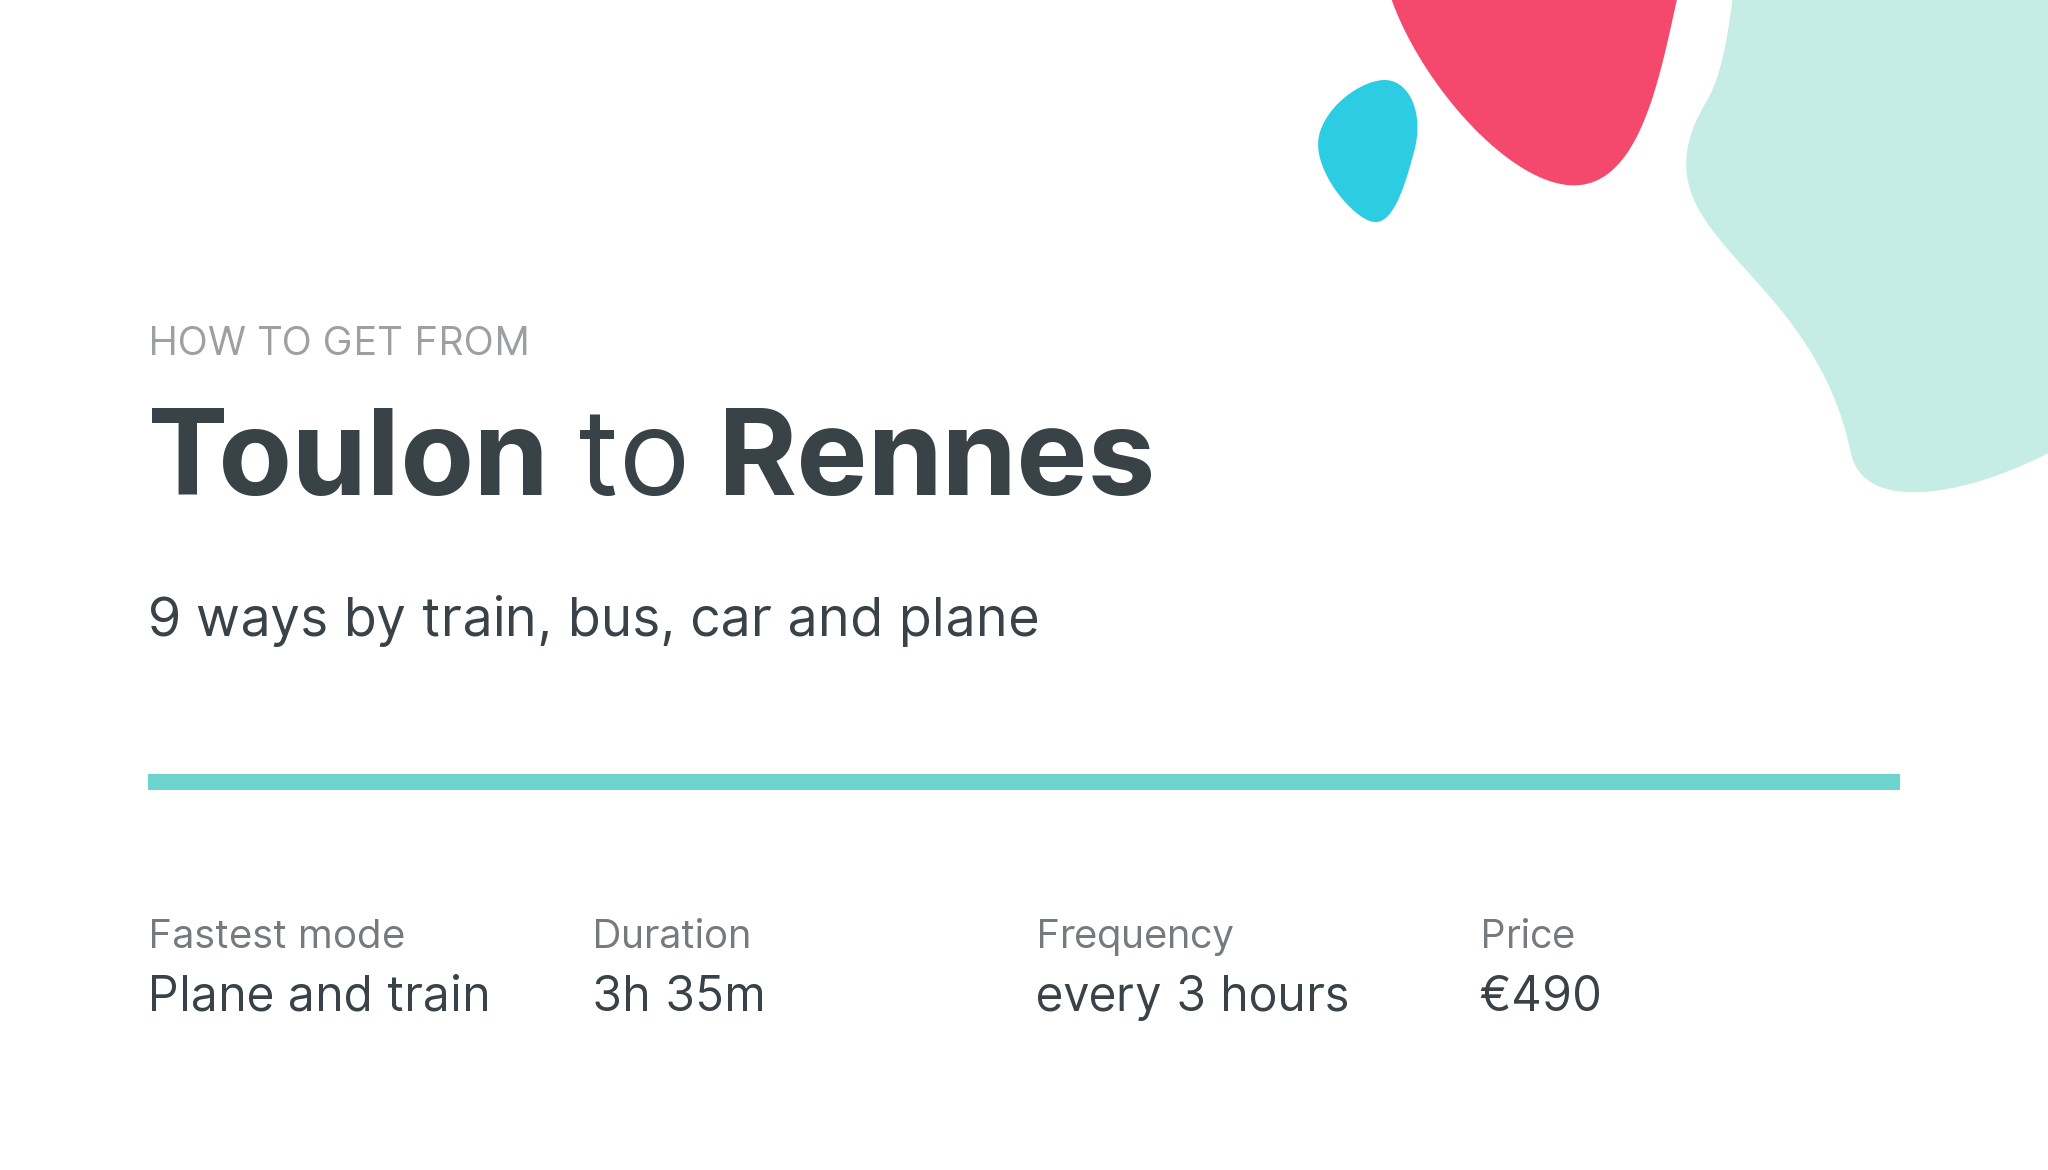 How do I get from Toulon to Rennes